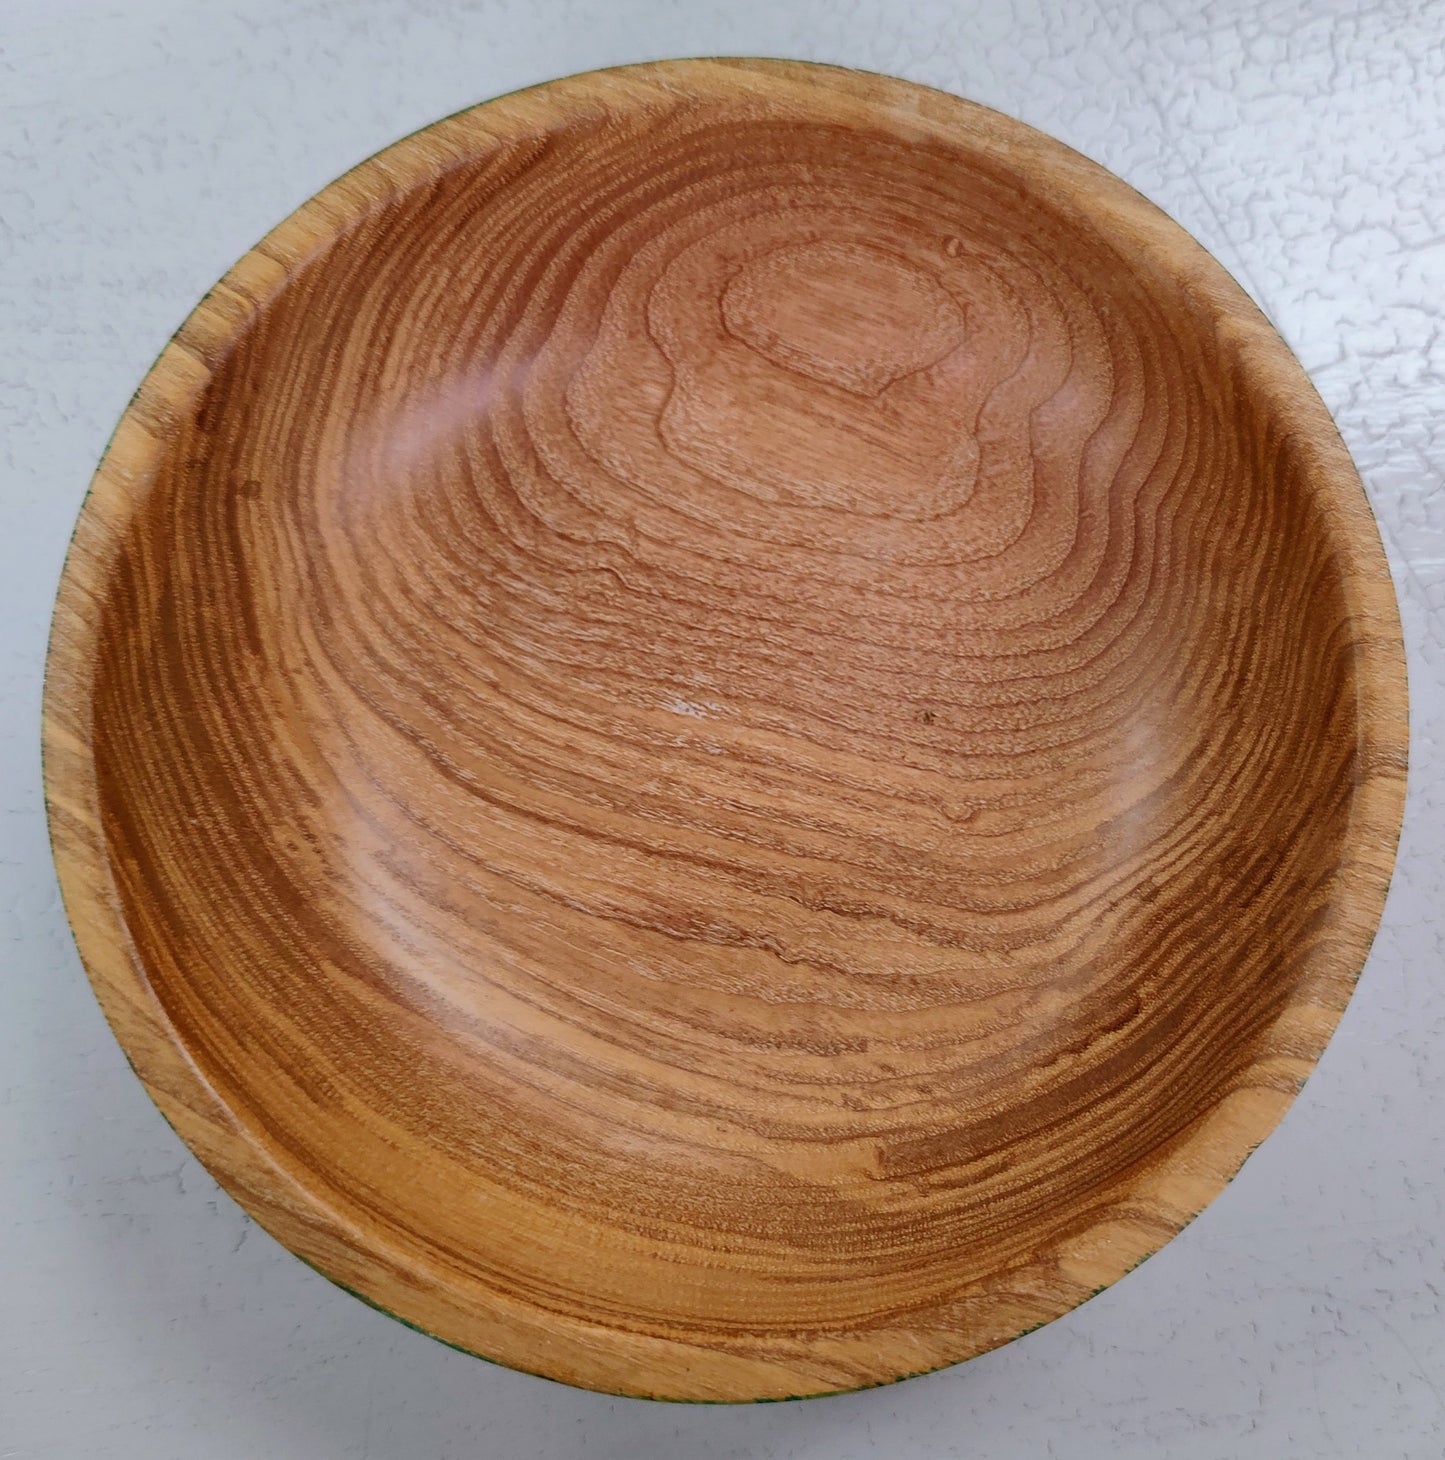 Andy Harris-Green Wooden Bowl